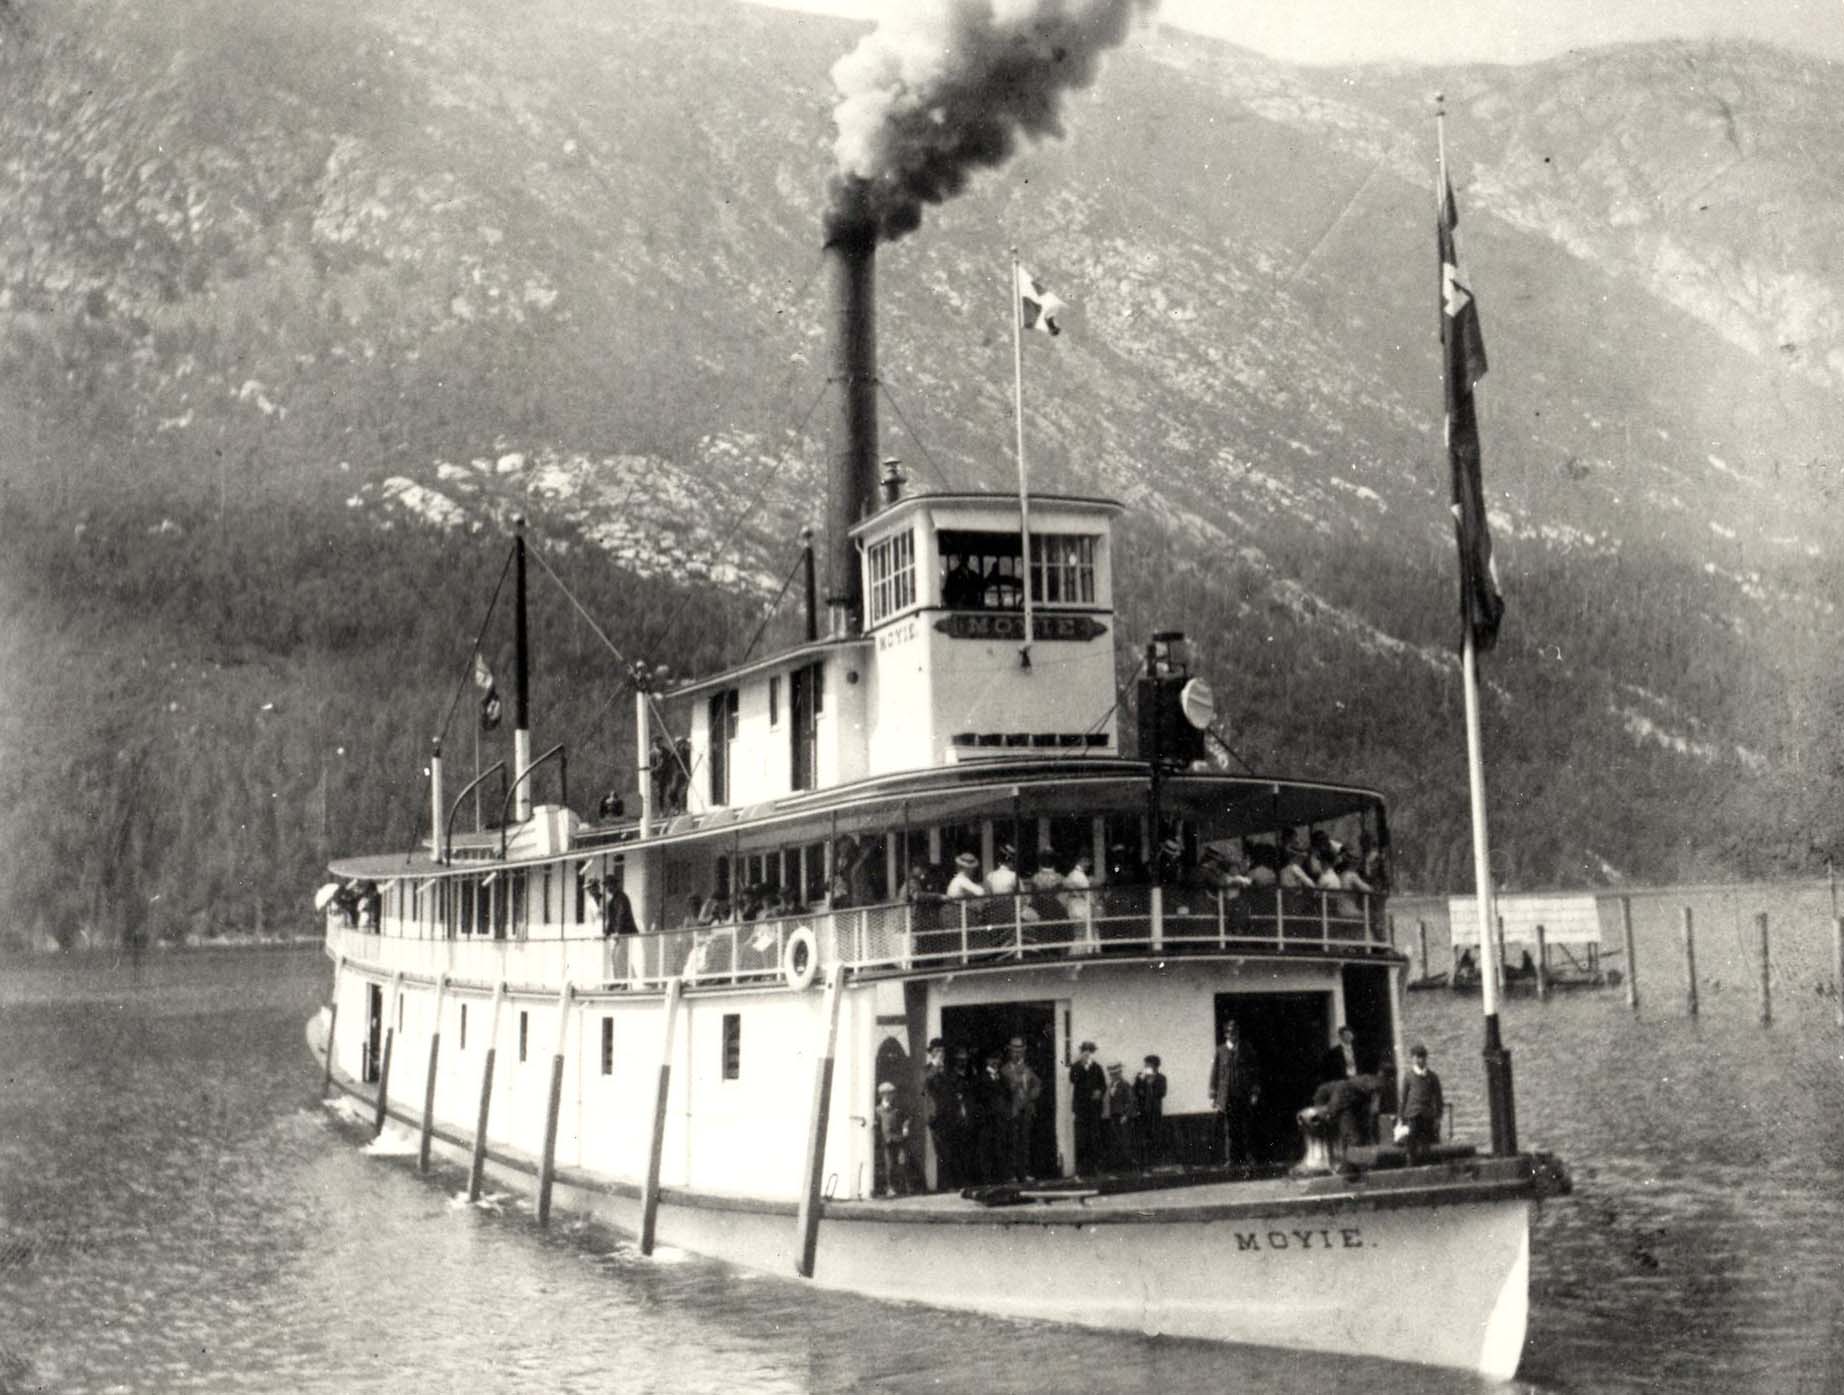 Historical landmark ship S.S. Moyie in need of a few repairs